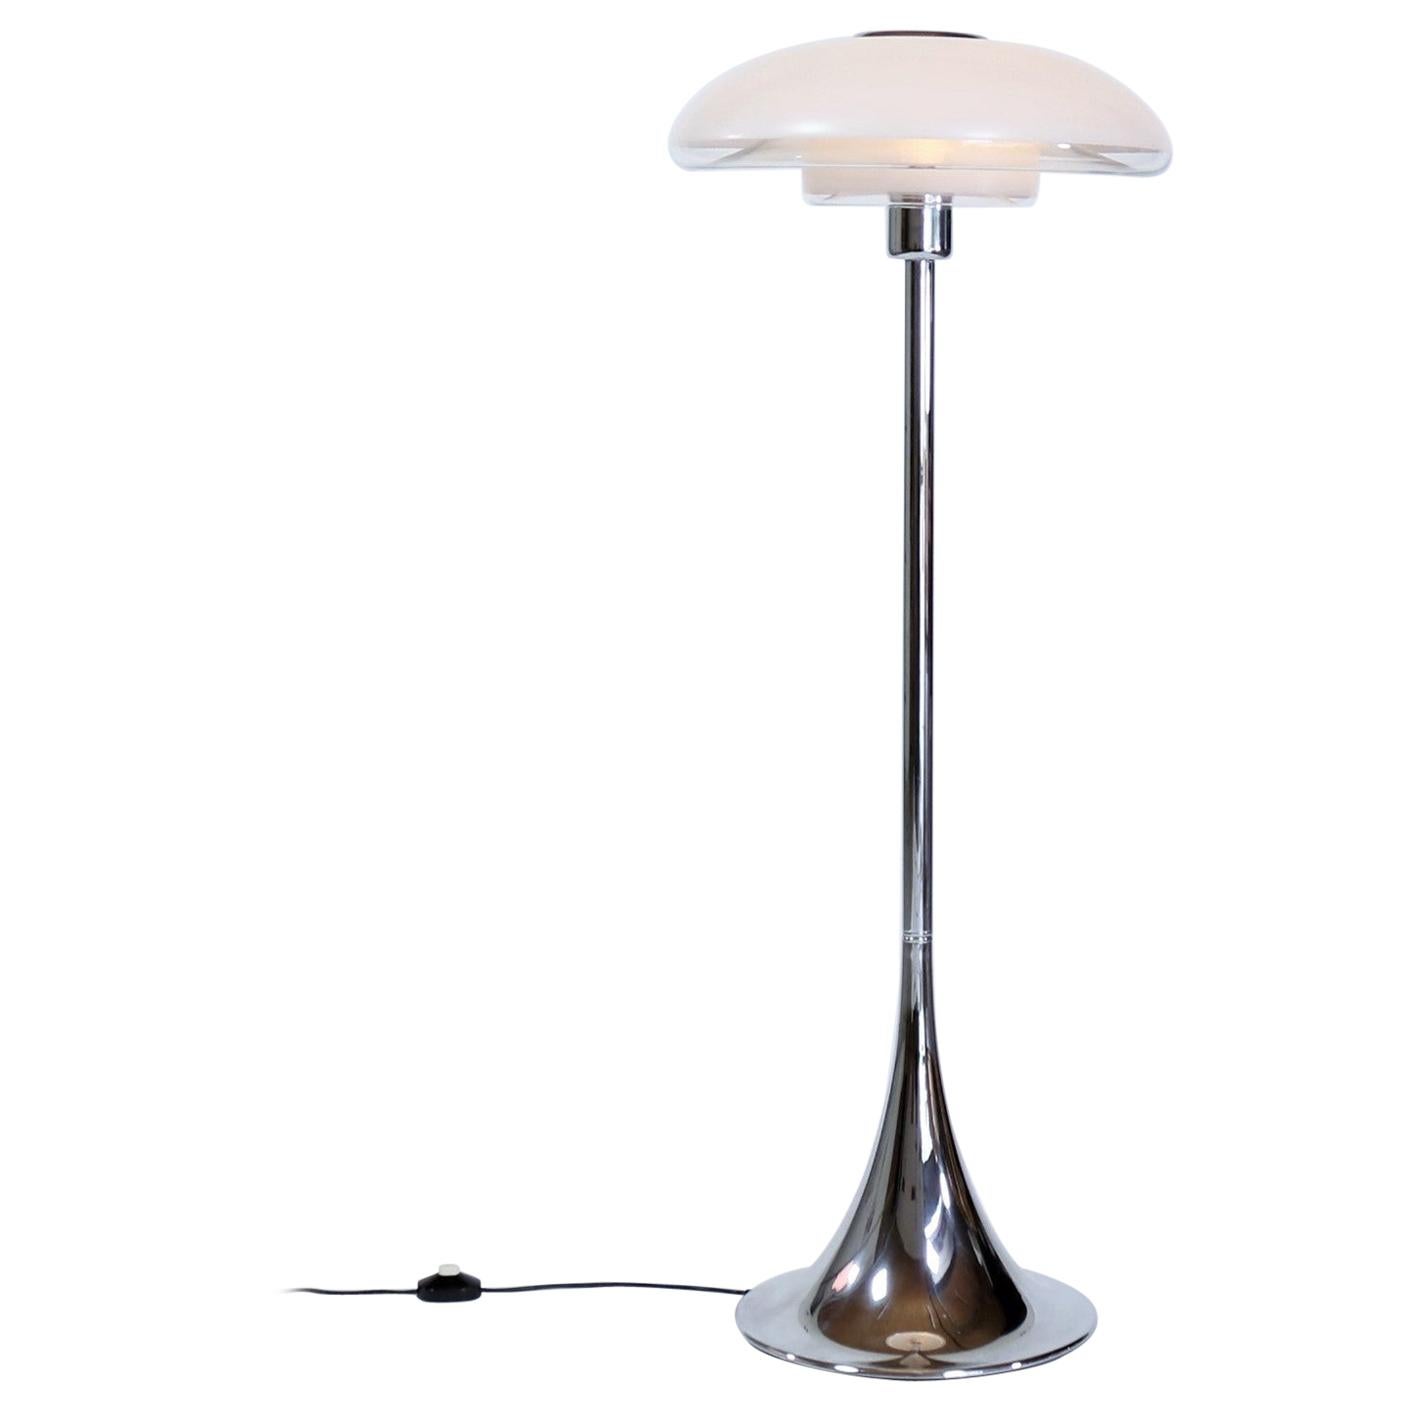 Verner Panton Floor Lamp "VP-Europa" in Glass and Chrome Made at Louis Poulsen